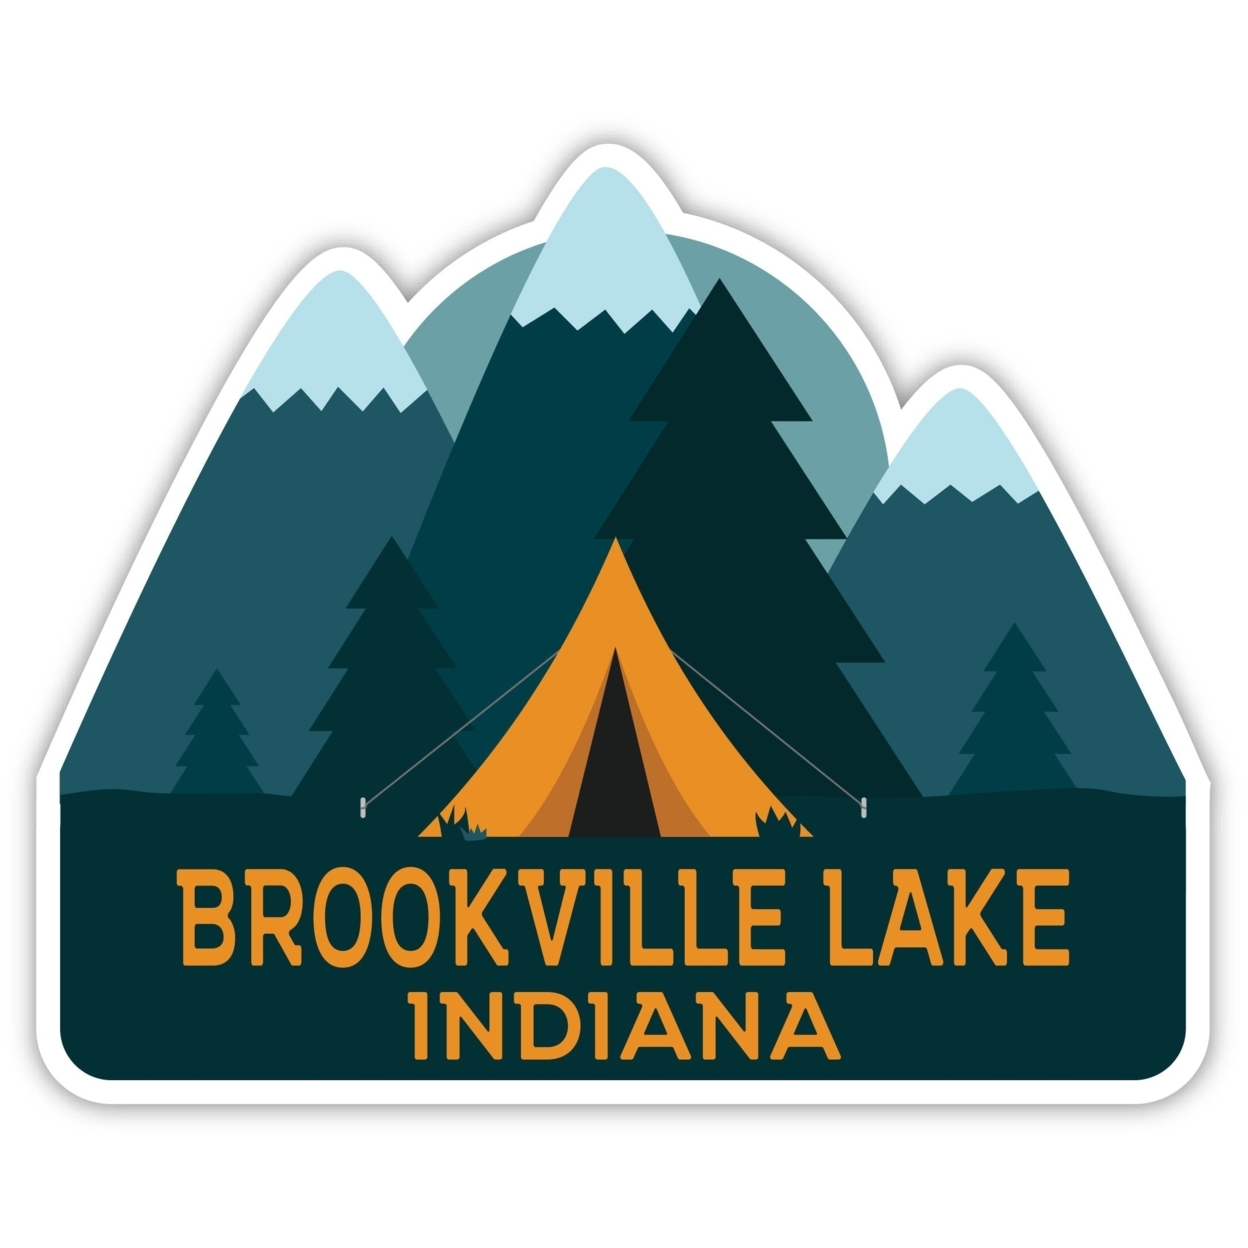 Brookville Lake Indiana Souvenir Decorative Stickers (Choose Theme And Size) - 4-Pack, 2-Inch, Tent